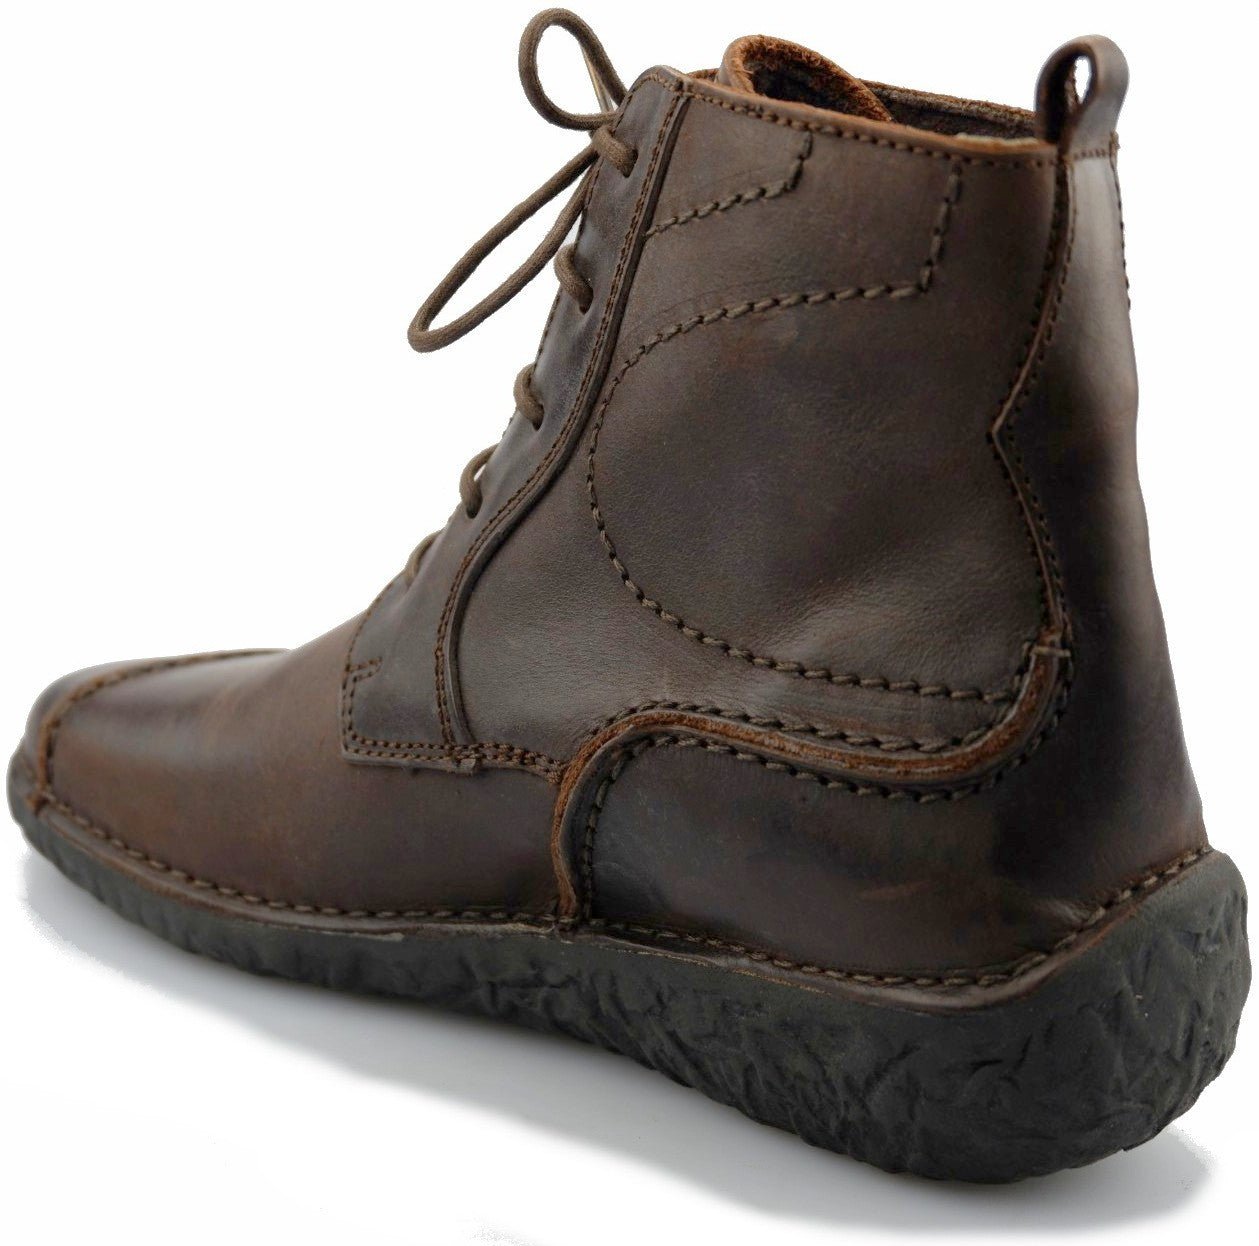 'Picadilly' women's boot - Brown - Chaplinshoes'Picadilly' women's boot - BrownCamel Active